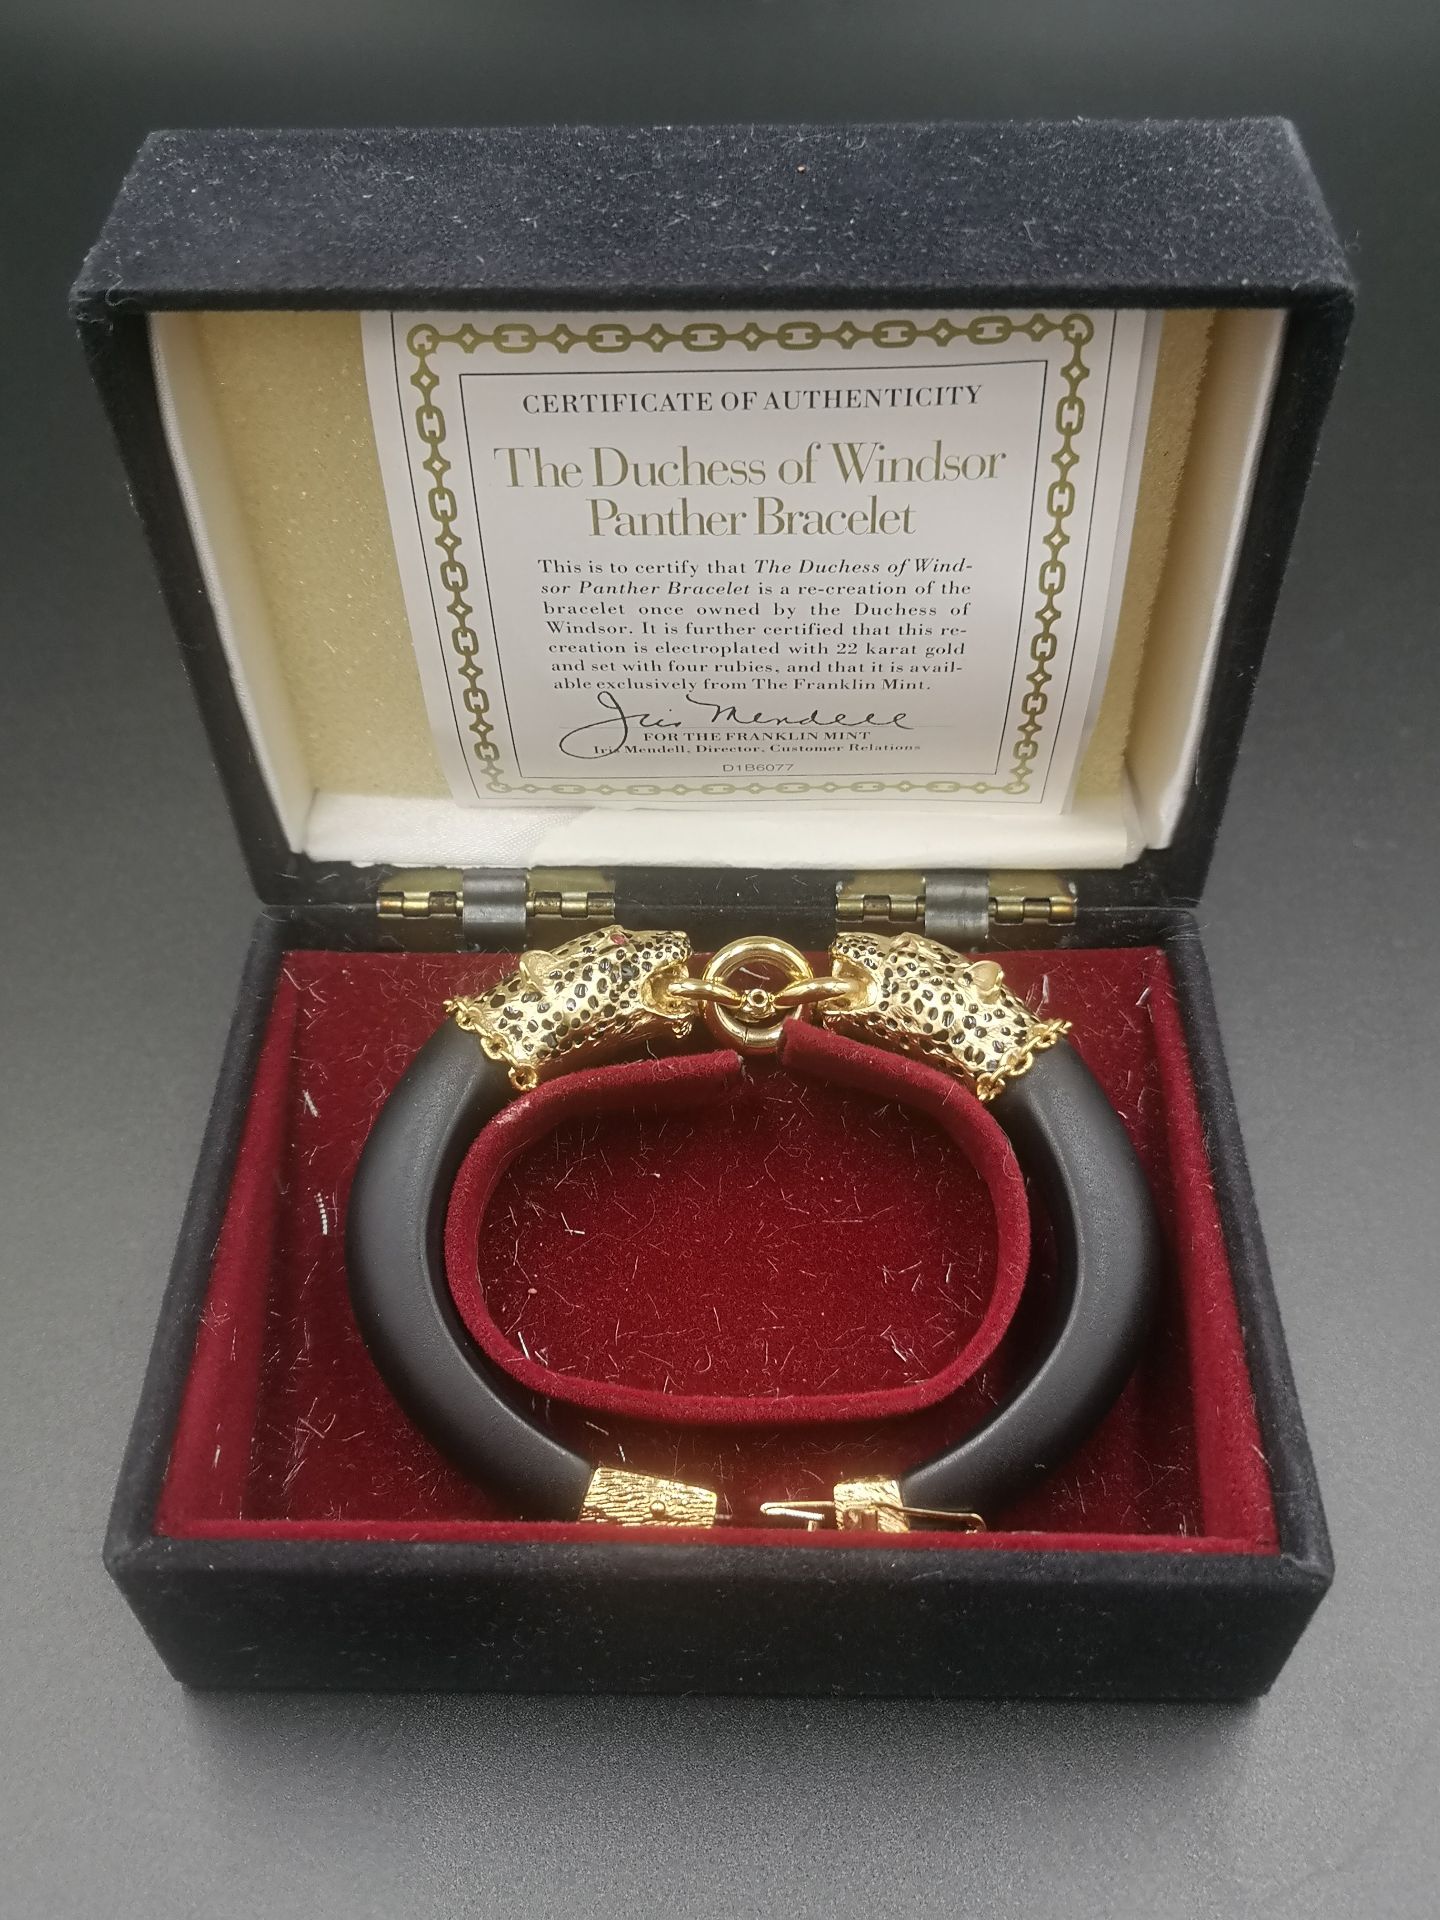 Franklin Mint Duchess of Windsor panther bracelet with certificate of authenticity. - Image 4 of 5